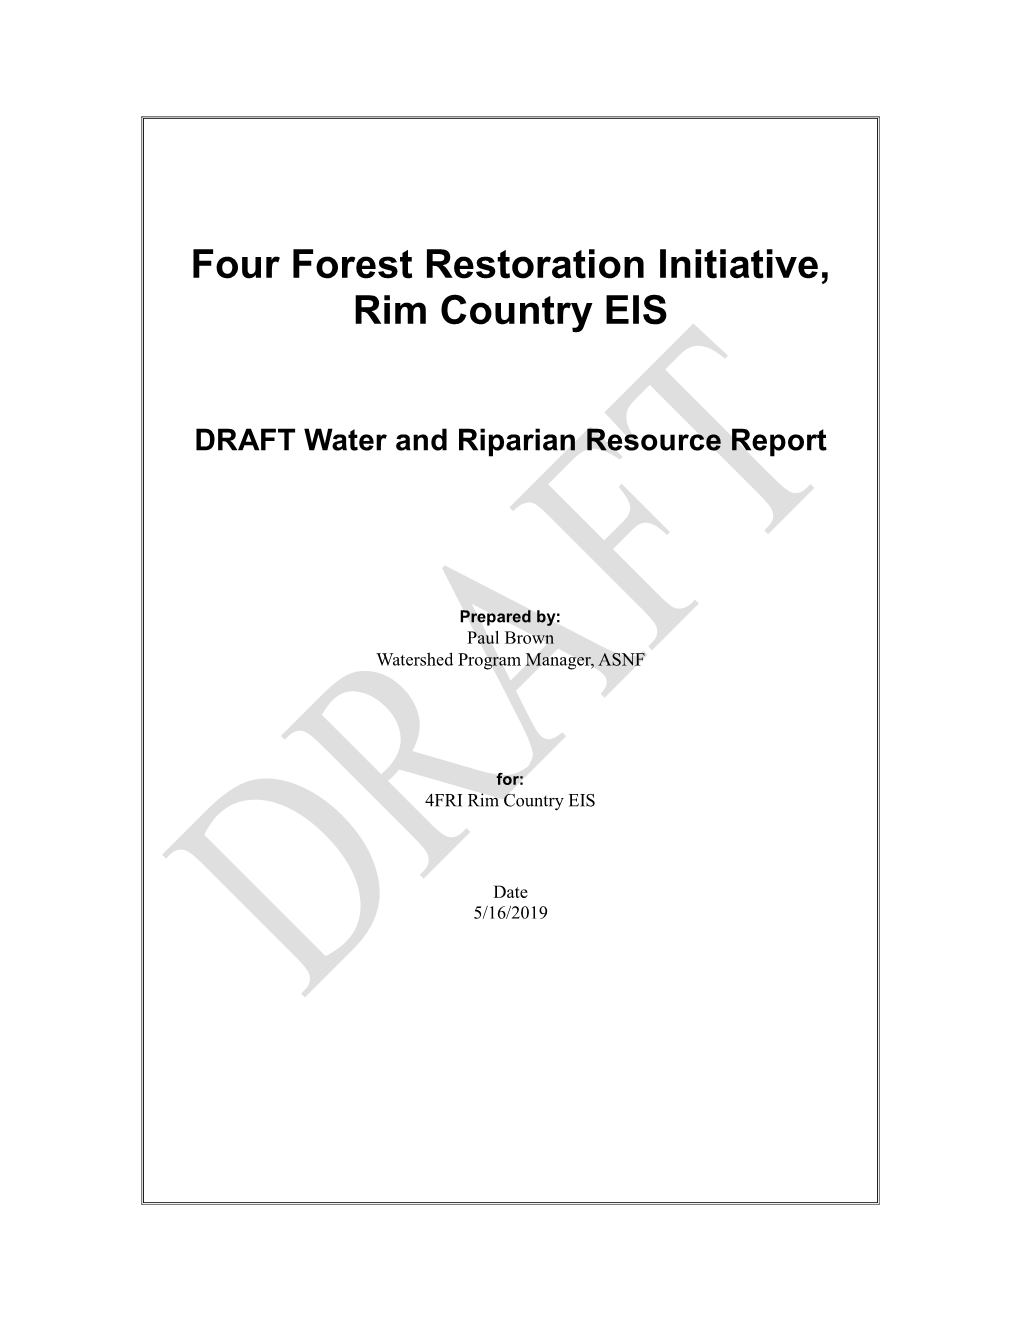 Water and Riparian Resource Report